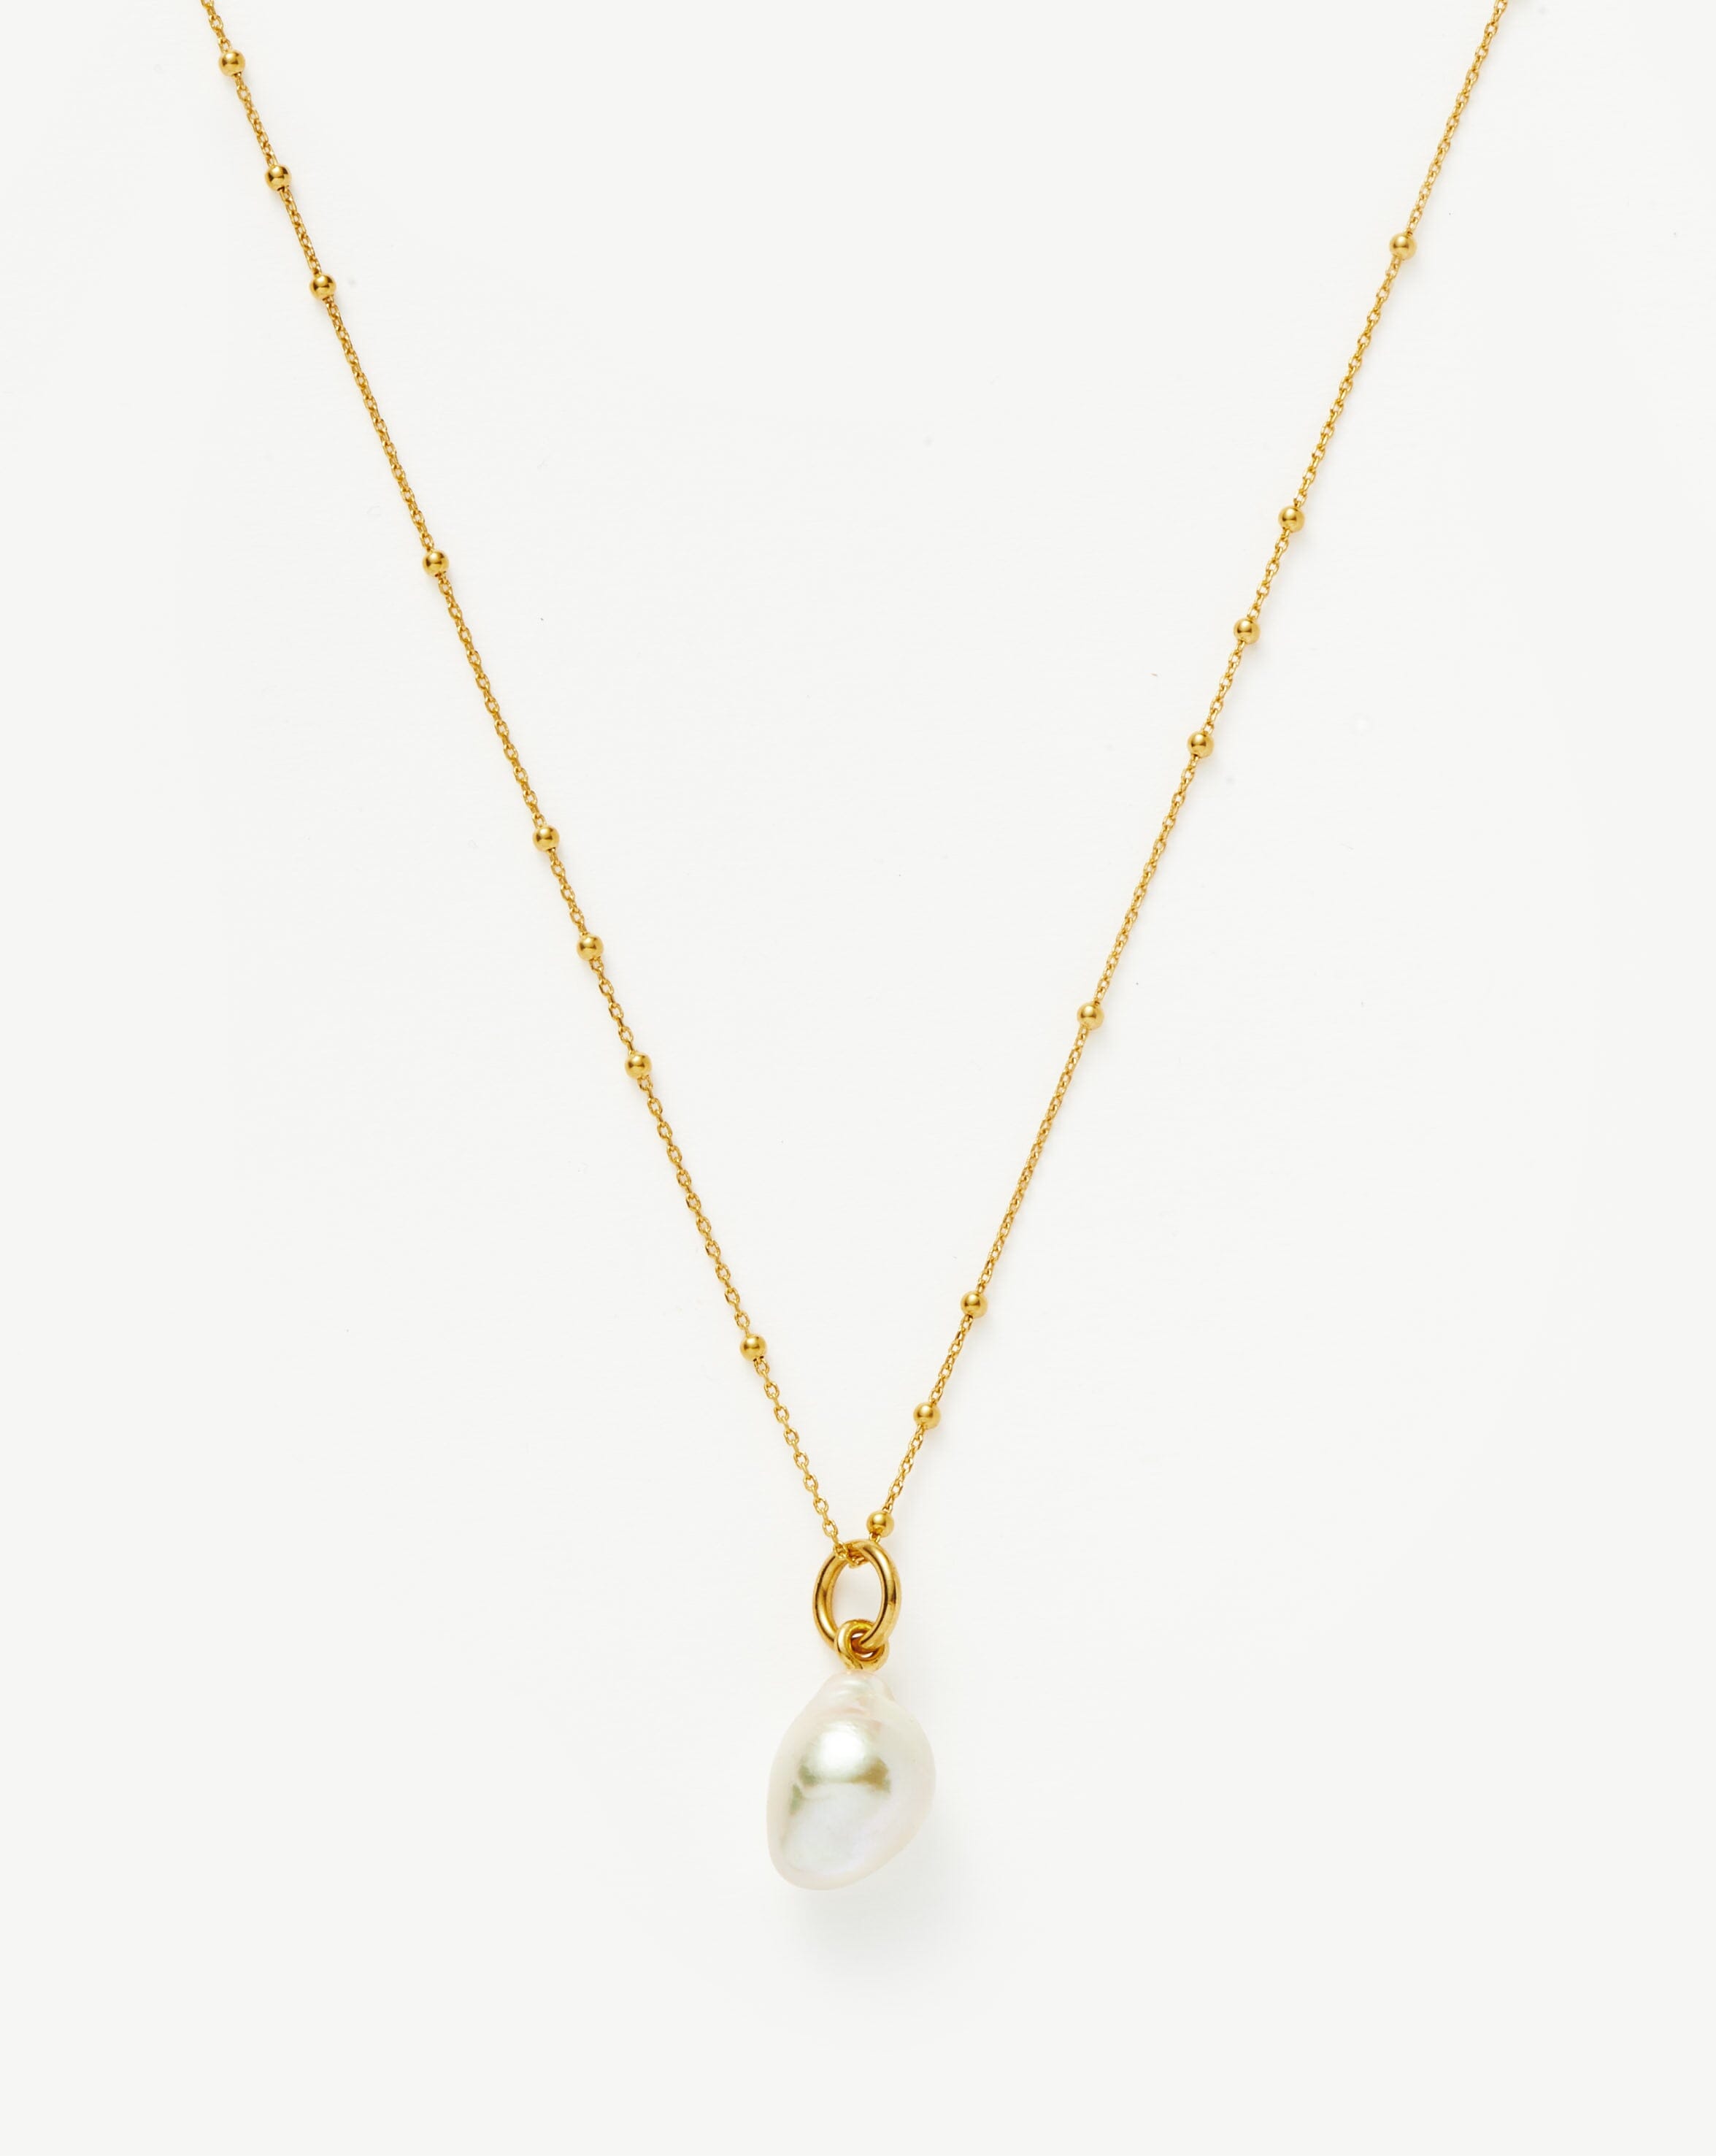 Women's Dainty Pearl Pendant Necklace in Gold Vermeil by Quince